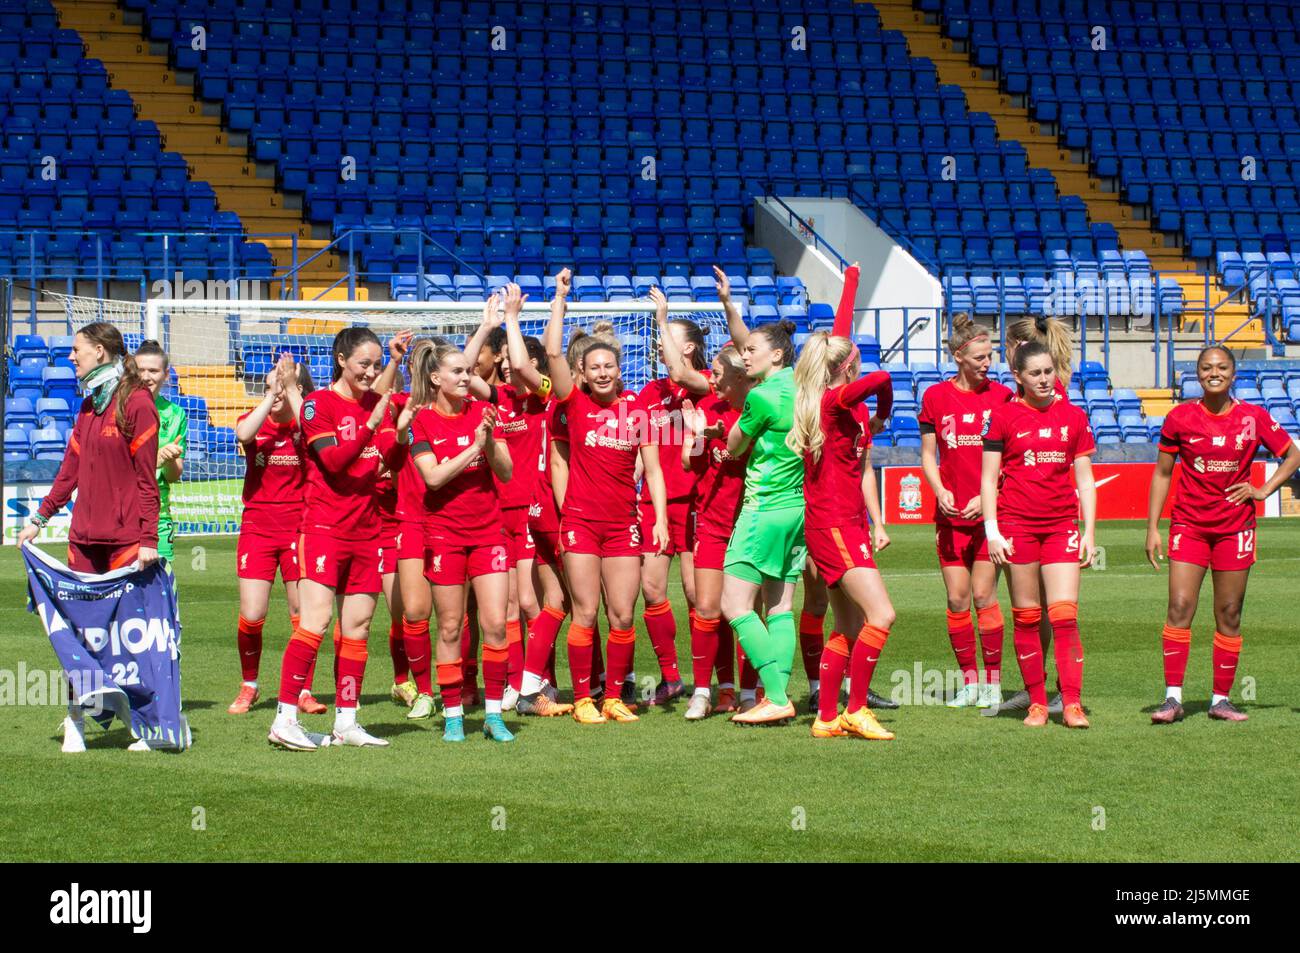 Birkenhead, UK. 24th Apr, 2022. Liverpool players celebrate a goal players celebrate after beating Sheffield United 6-1 during the Womens Championship football match between Liverpool and Sheffield United at Prenton Park in Birkenhead, England. Terry Scott/SPP Credit: SPP Sport Press Photo. /Alamy Live News Stock Photo